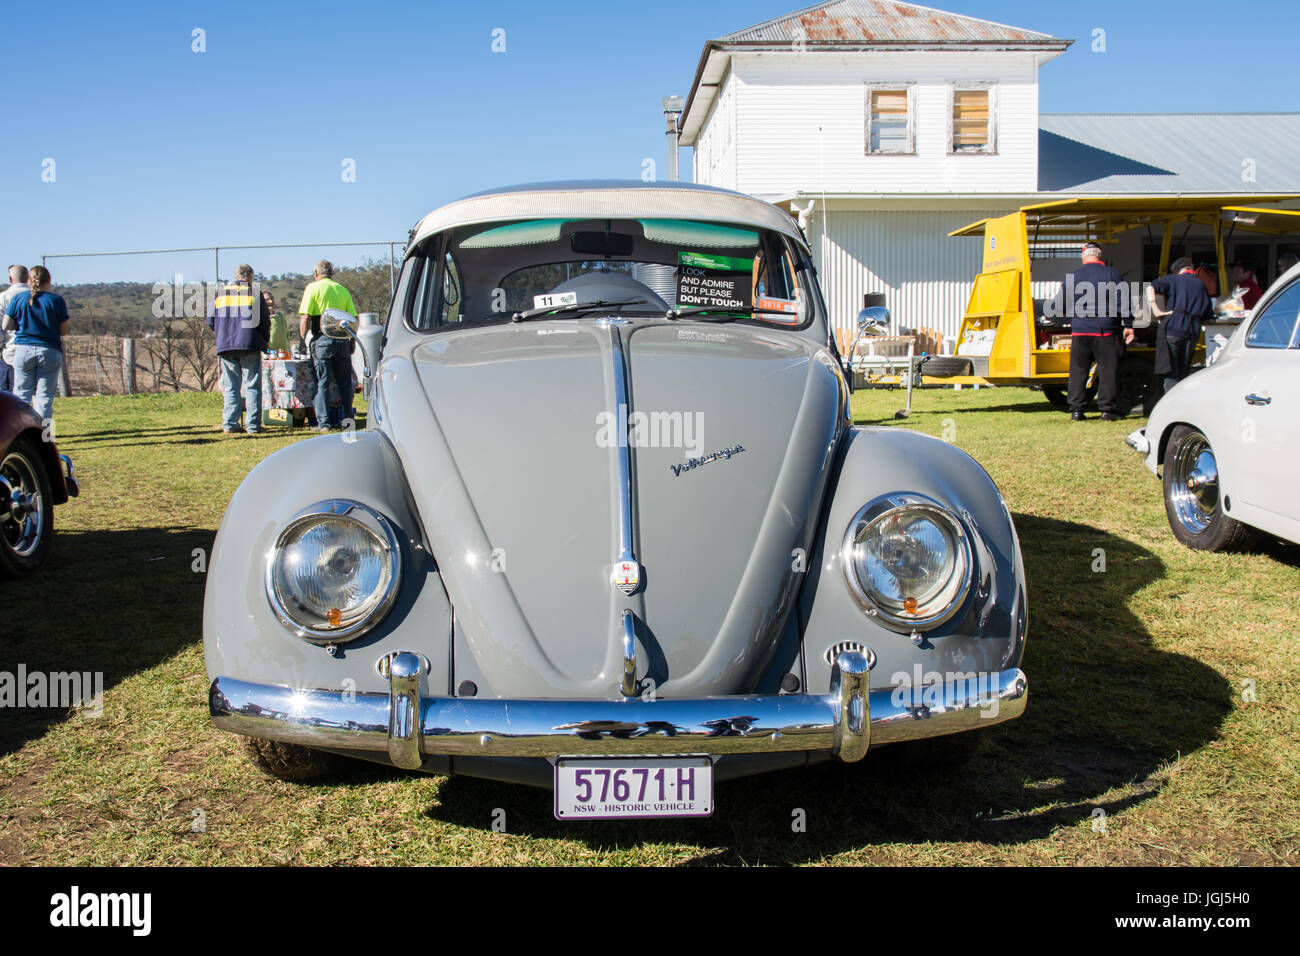 A nicely restored late 1960s Volkswagen Beetle on display at Barraba NSW Australia. Stock Photo